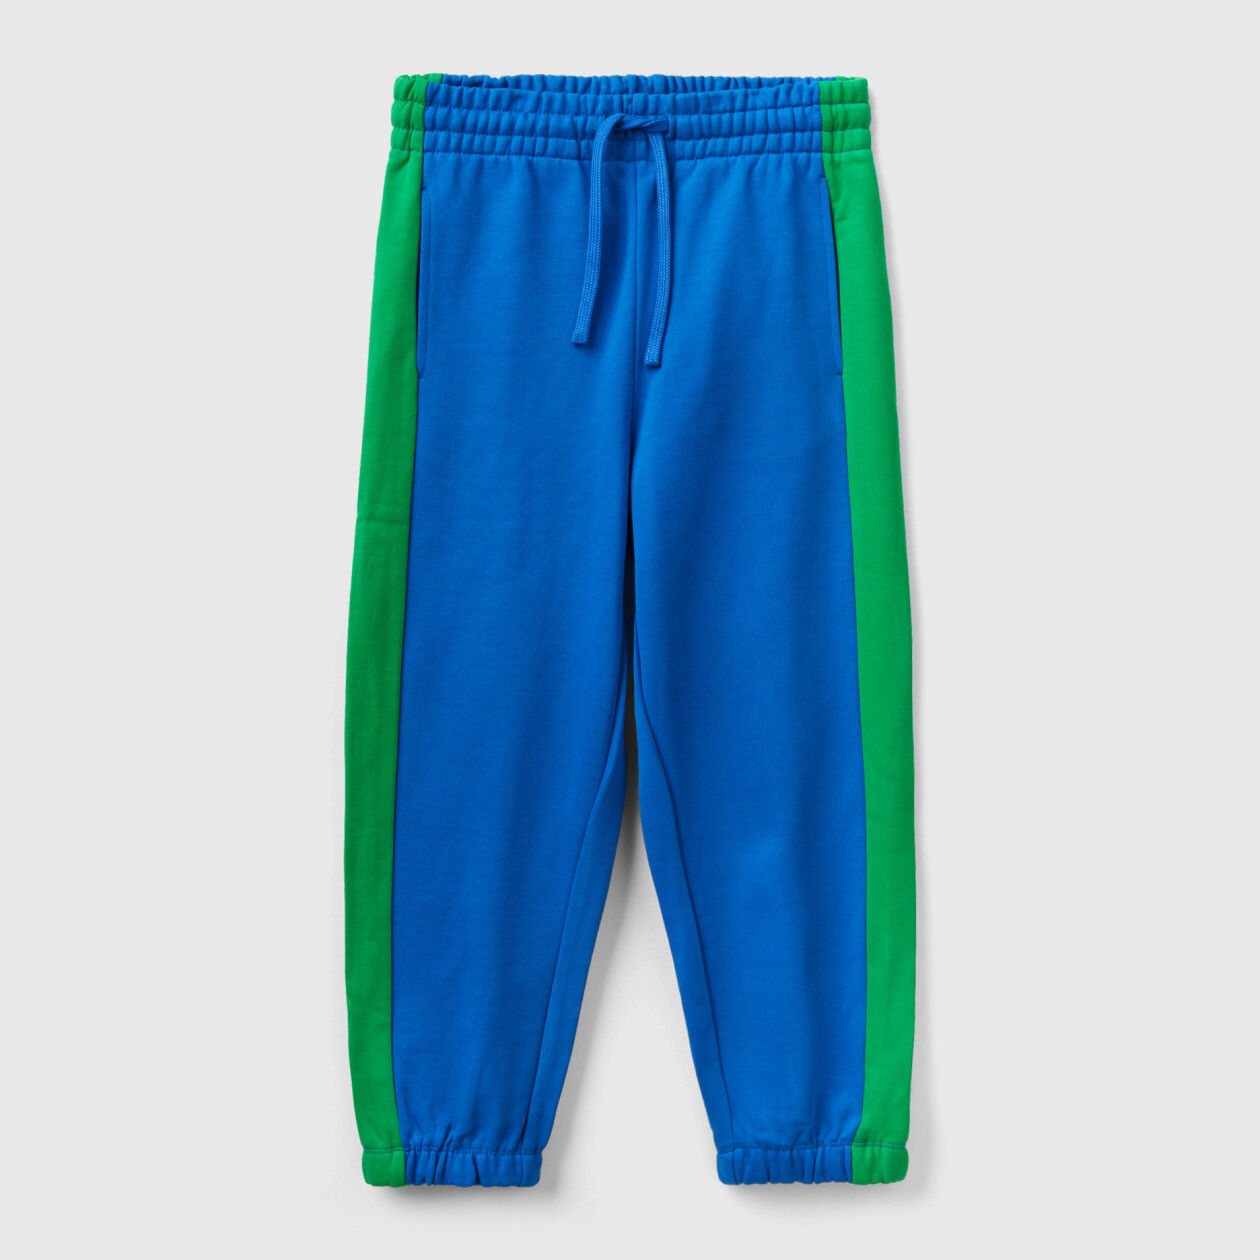 Balloon Fit Track Pants - Buy Balloon Fit Track Pants online in India